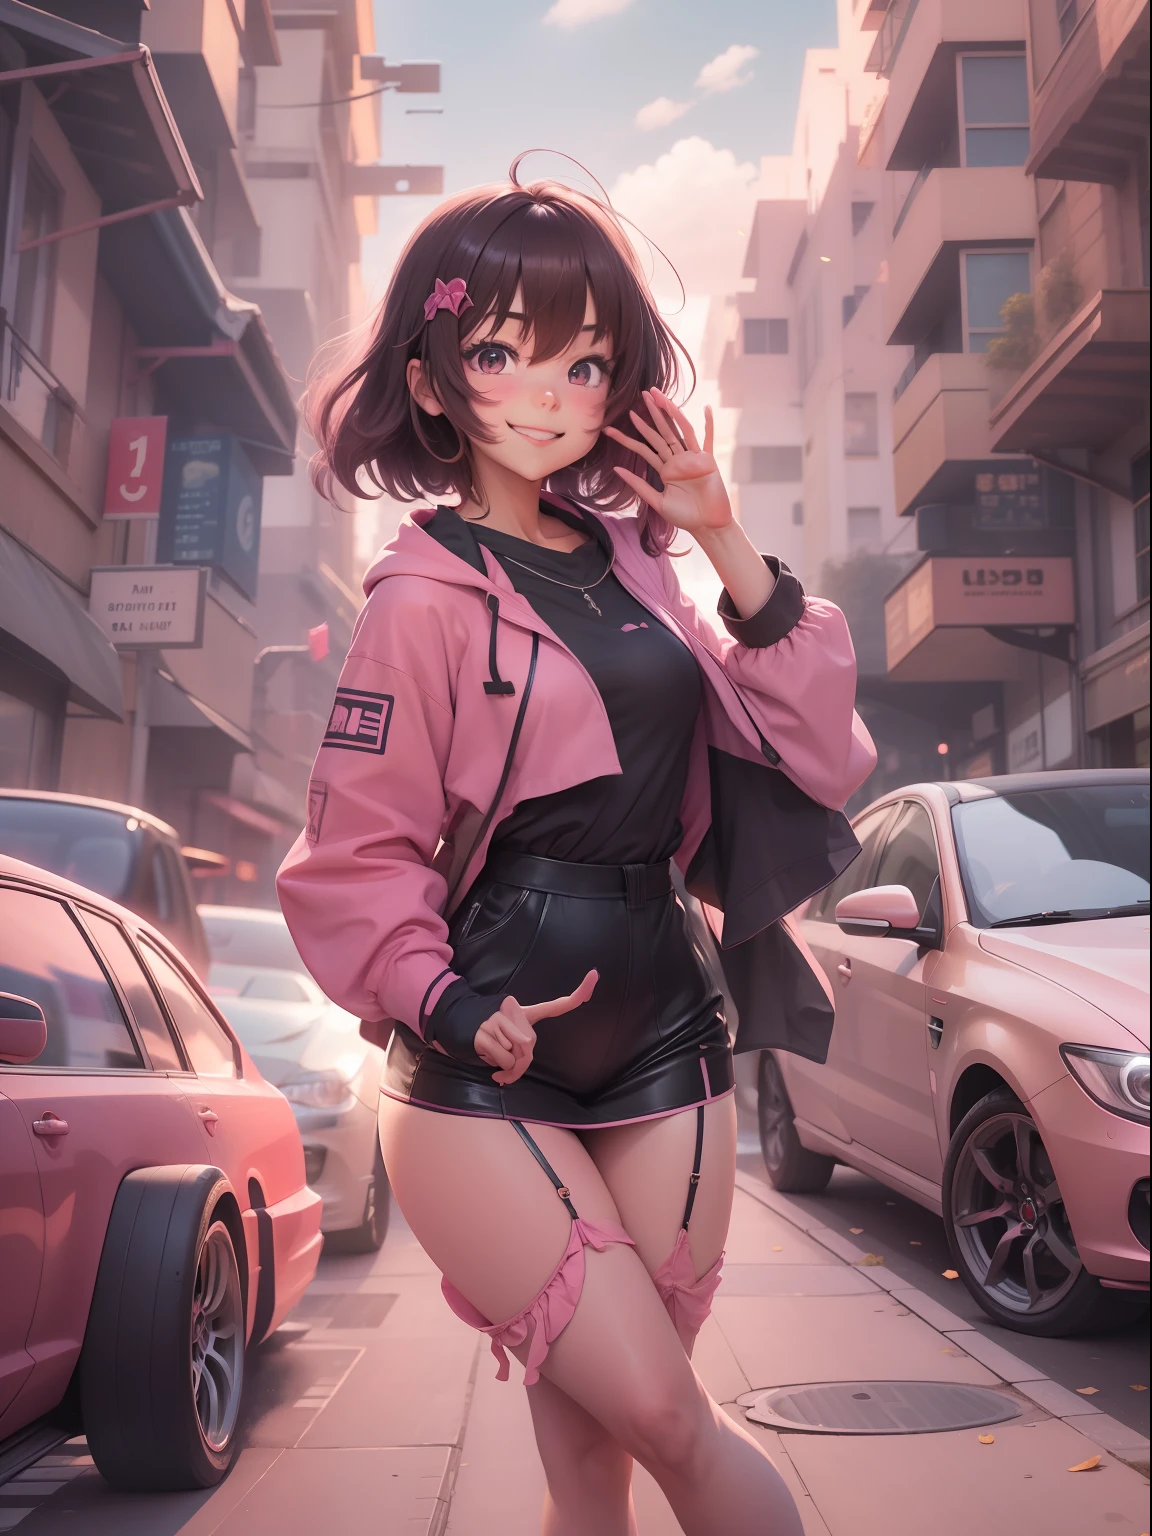 --Anime girl--crouched --smiling --waving her hand --dressed in pink,
--Boxer --Fight pose --dressed in black --serious face --clenched puns,
--Urban scenery --buildings --cars in the background,
--Interagindo --desafiando --aceitando o desafio.